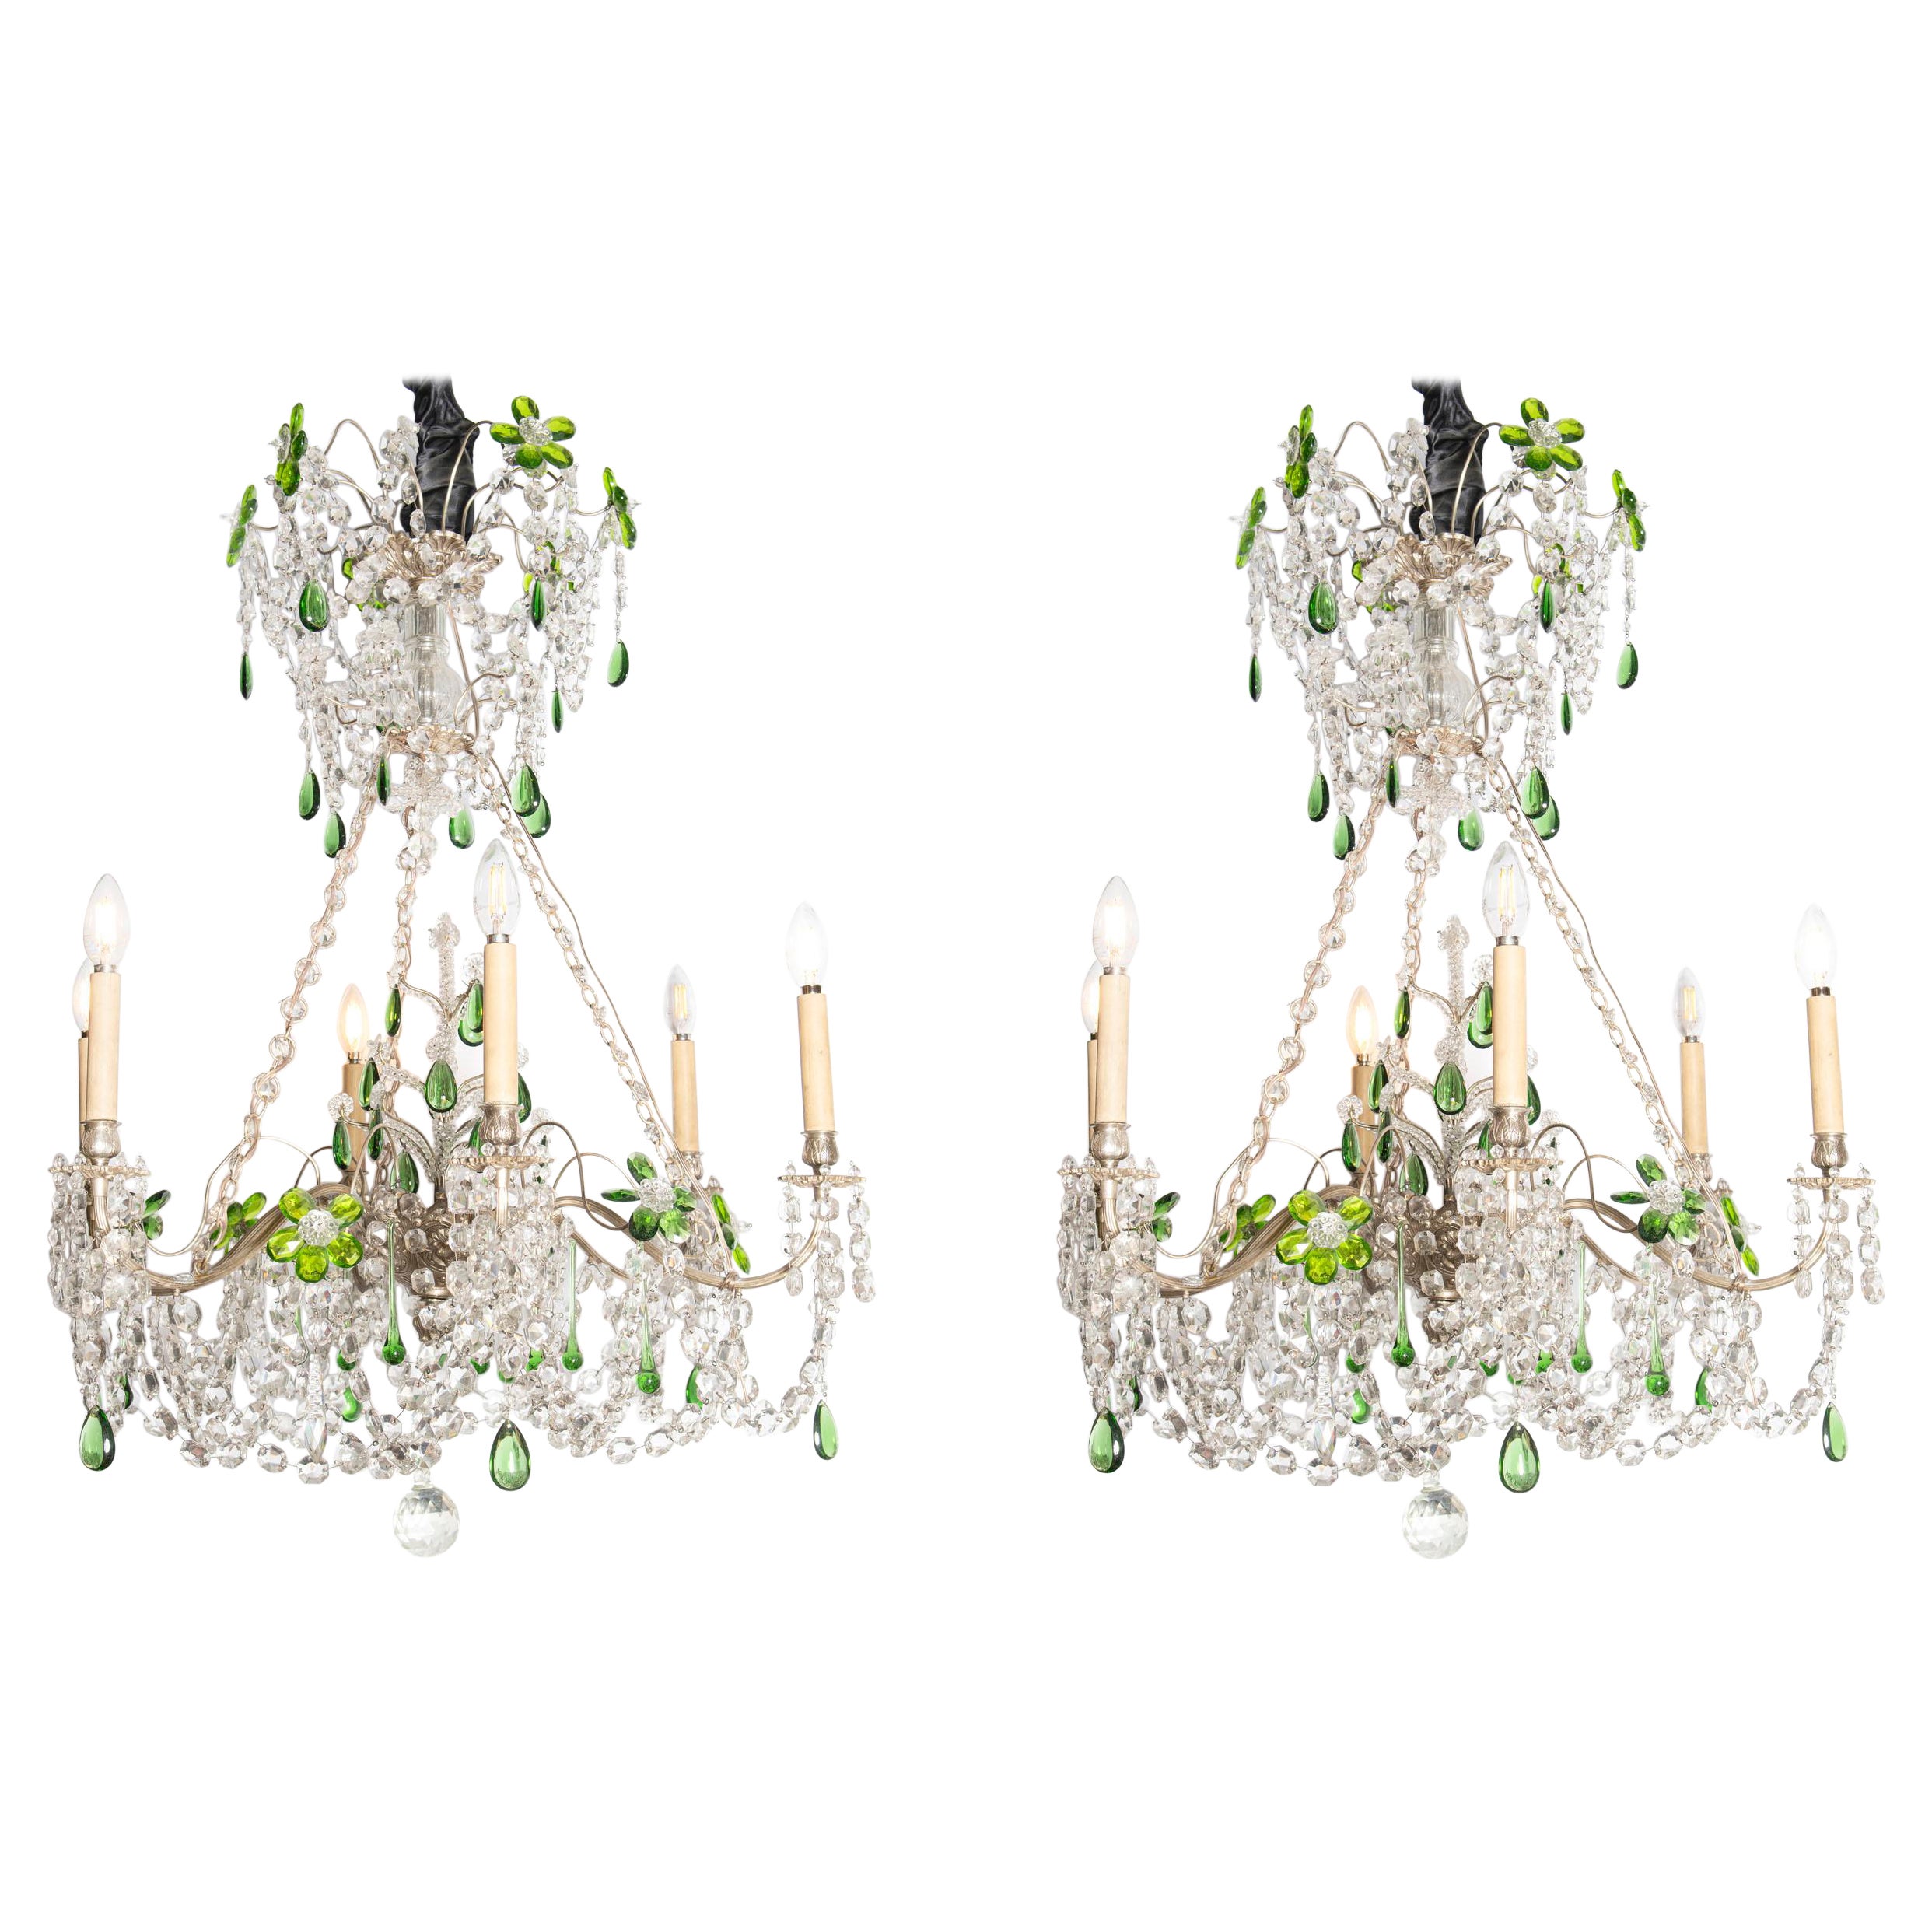 Pair of Chezh Crystal and Silver Bronze Chandeliers, England, Early 20th Century